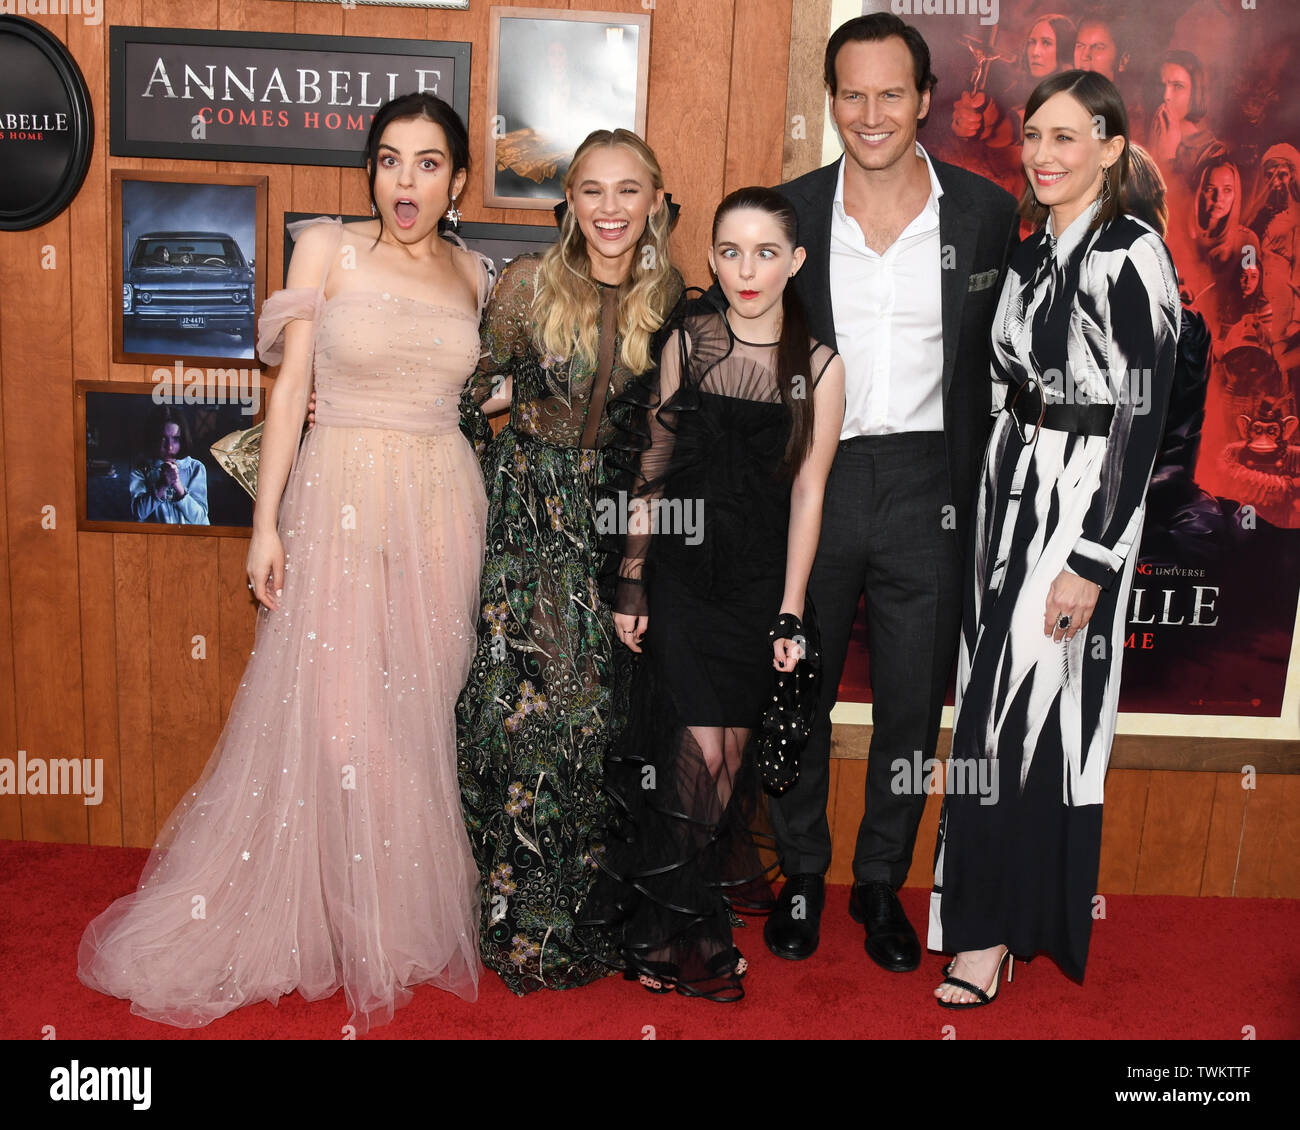 June 20, 2019 - Westwood, California, USA - 17, June 2019 - Westwood, California. (L-R) Actors Katie Sarife, Madison Iseman, Mckenna Grace, Patrick Wilson and Vera Farmiga attends the World Premiere of 'Annabelle Comes Home' at the Regency Village Theatre. (Credit Image: © Billy Bennight/ZUMA Wire) Stock Photo